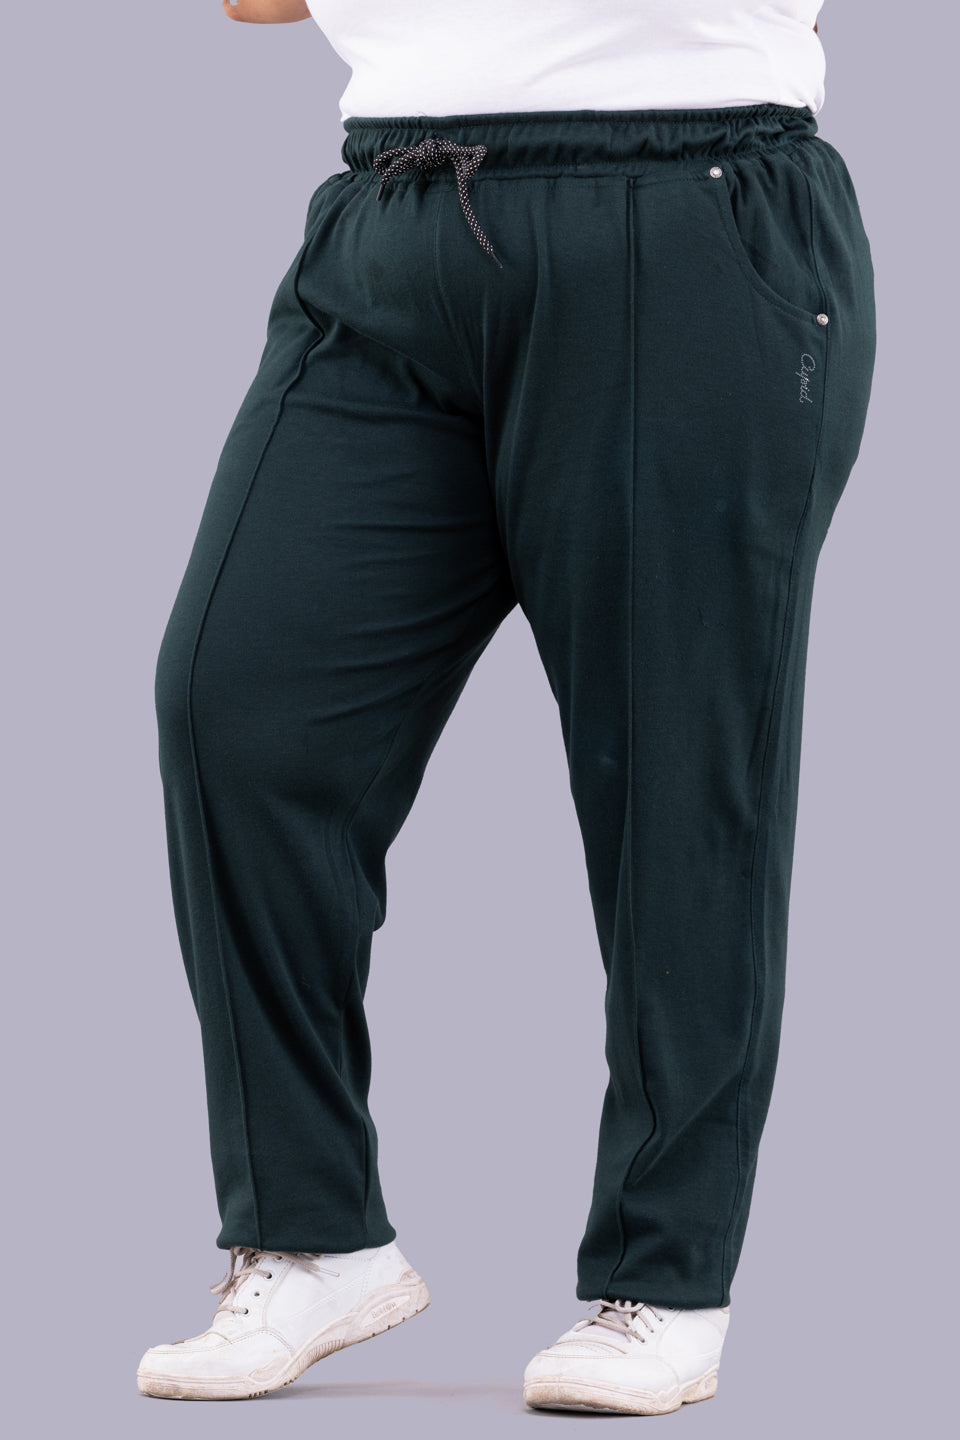 Comfy Bottle Green Relaxed Fit Cotton Lounge pants for Women online in India at best prices